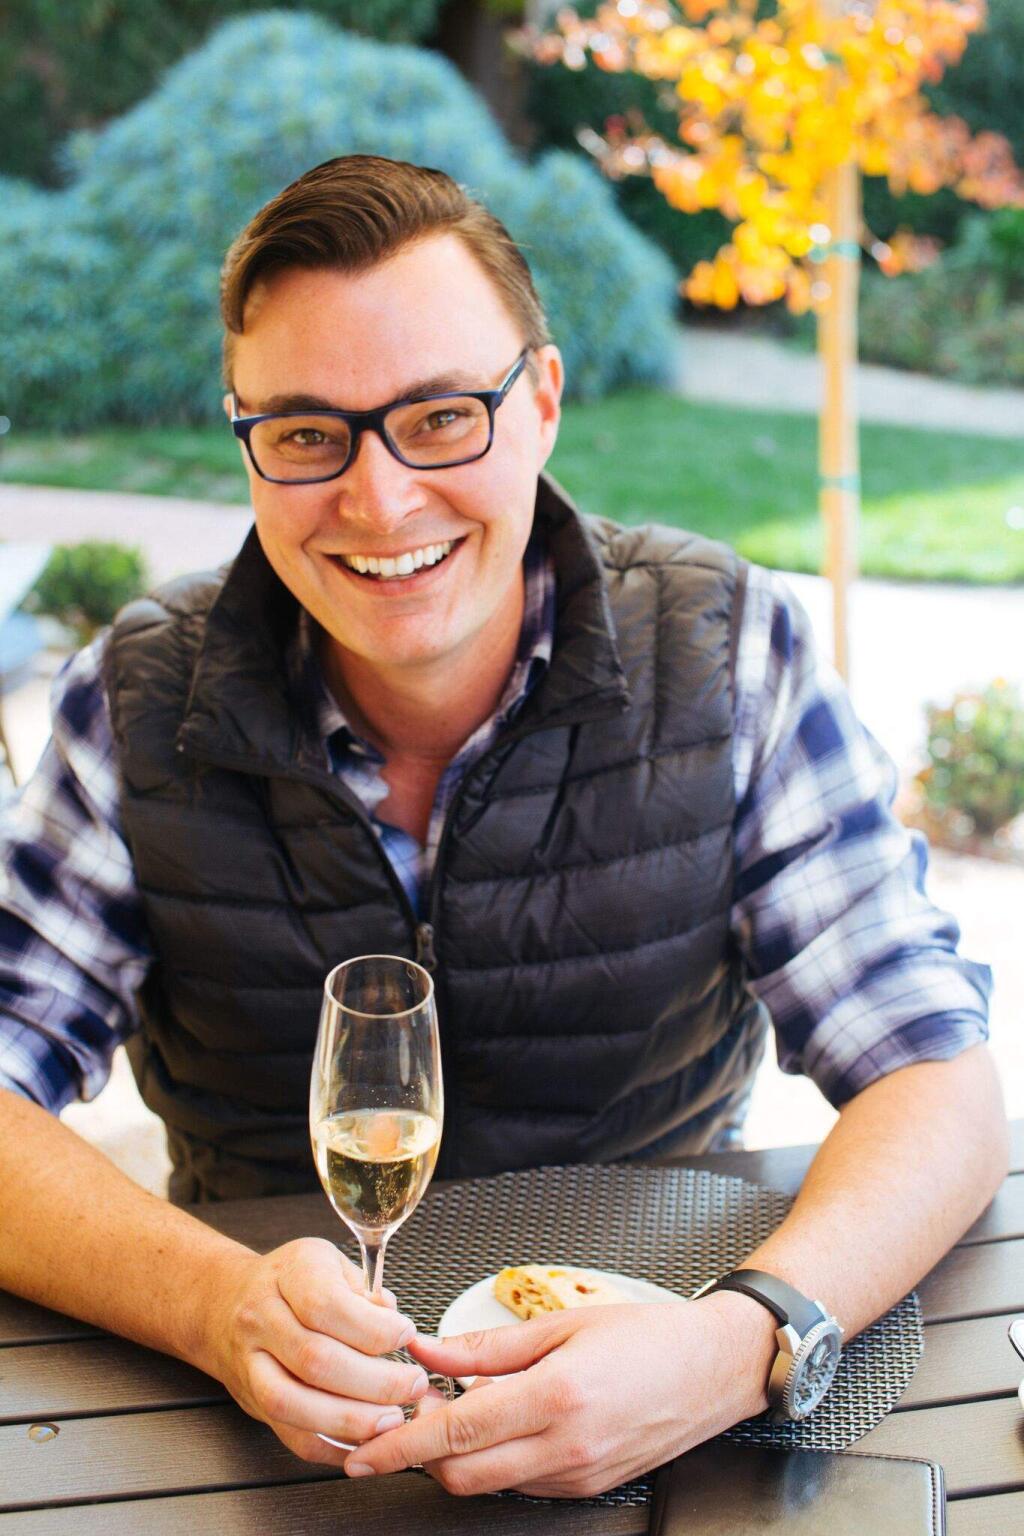 Landon McPherson, 35, founder of Harvest Card in Santa Rosa, is a North Bay Business Journal 2019 Forty Under 40 winner. (COURTESY PHOTO)